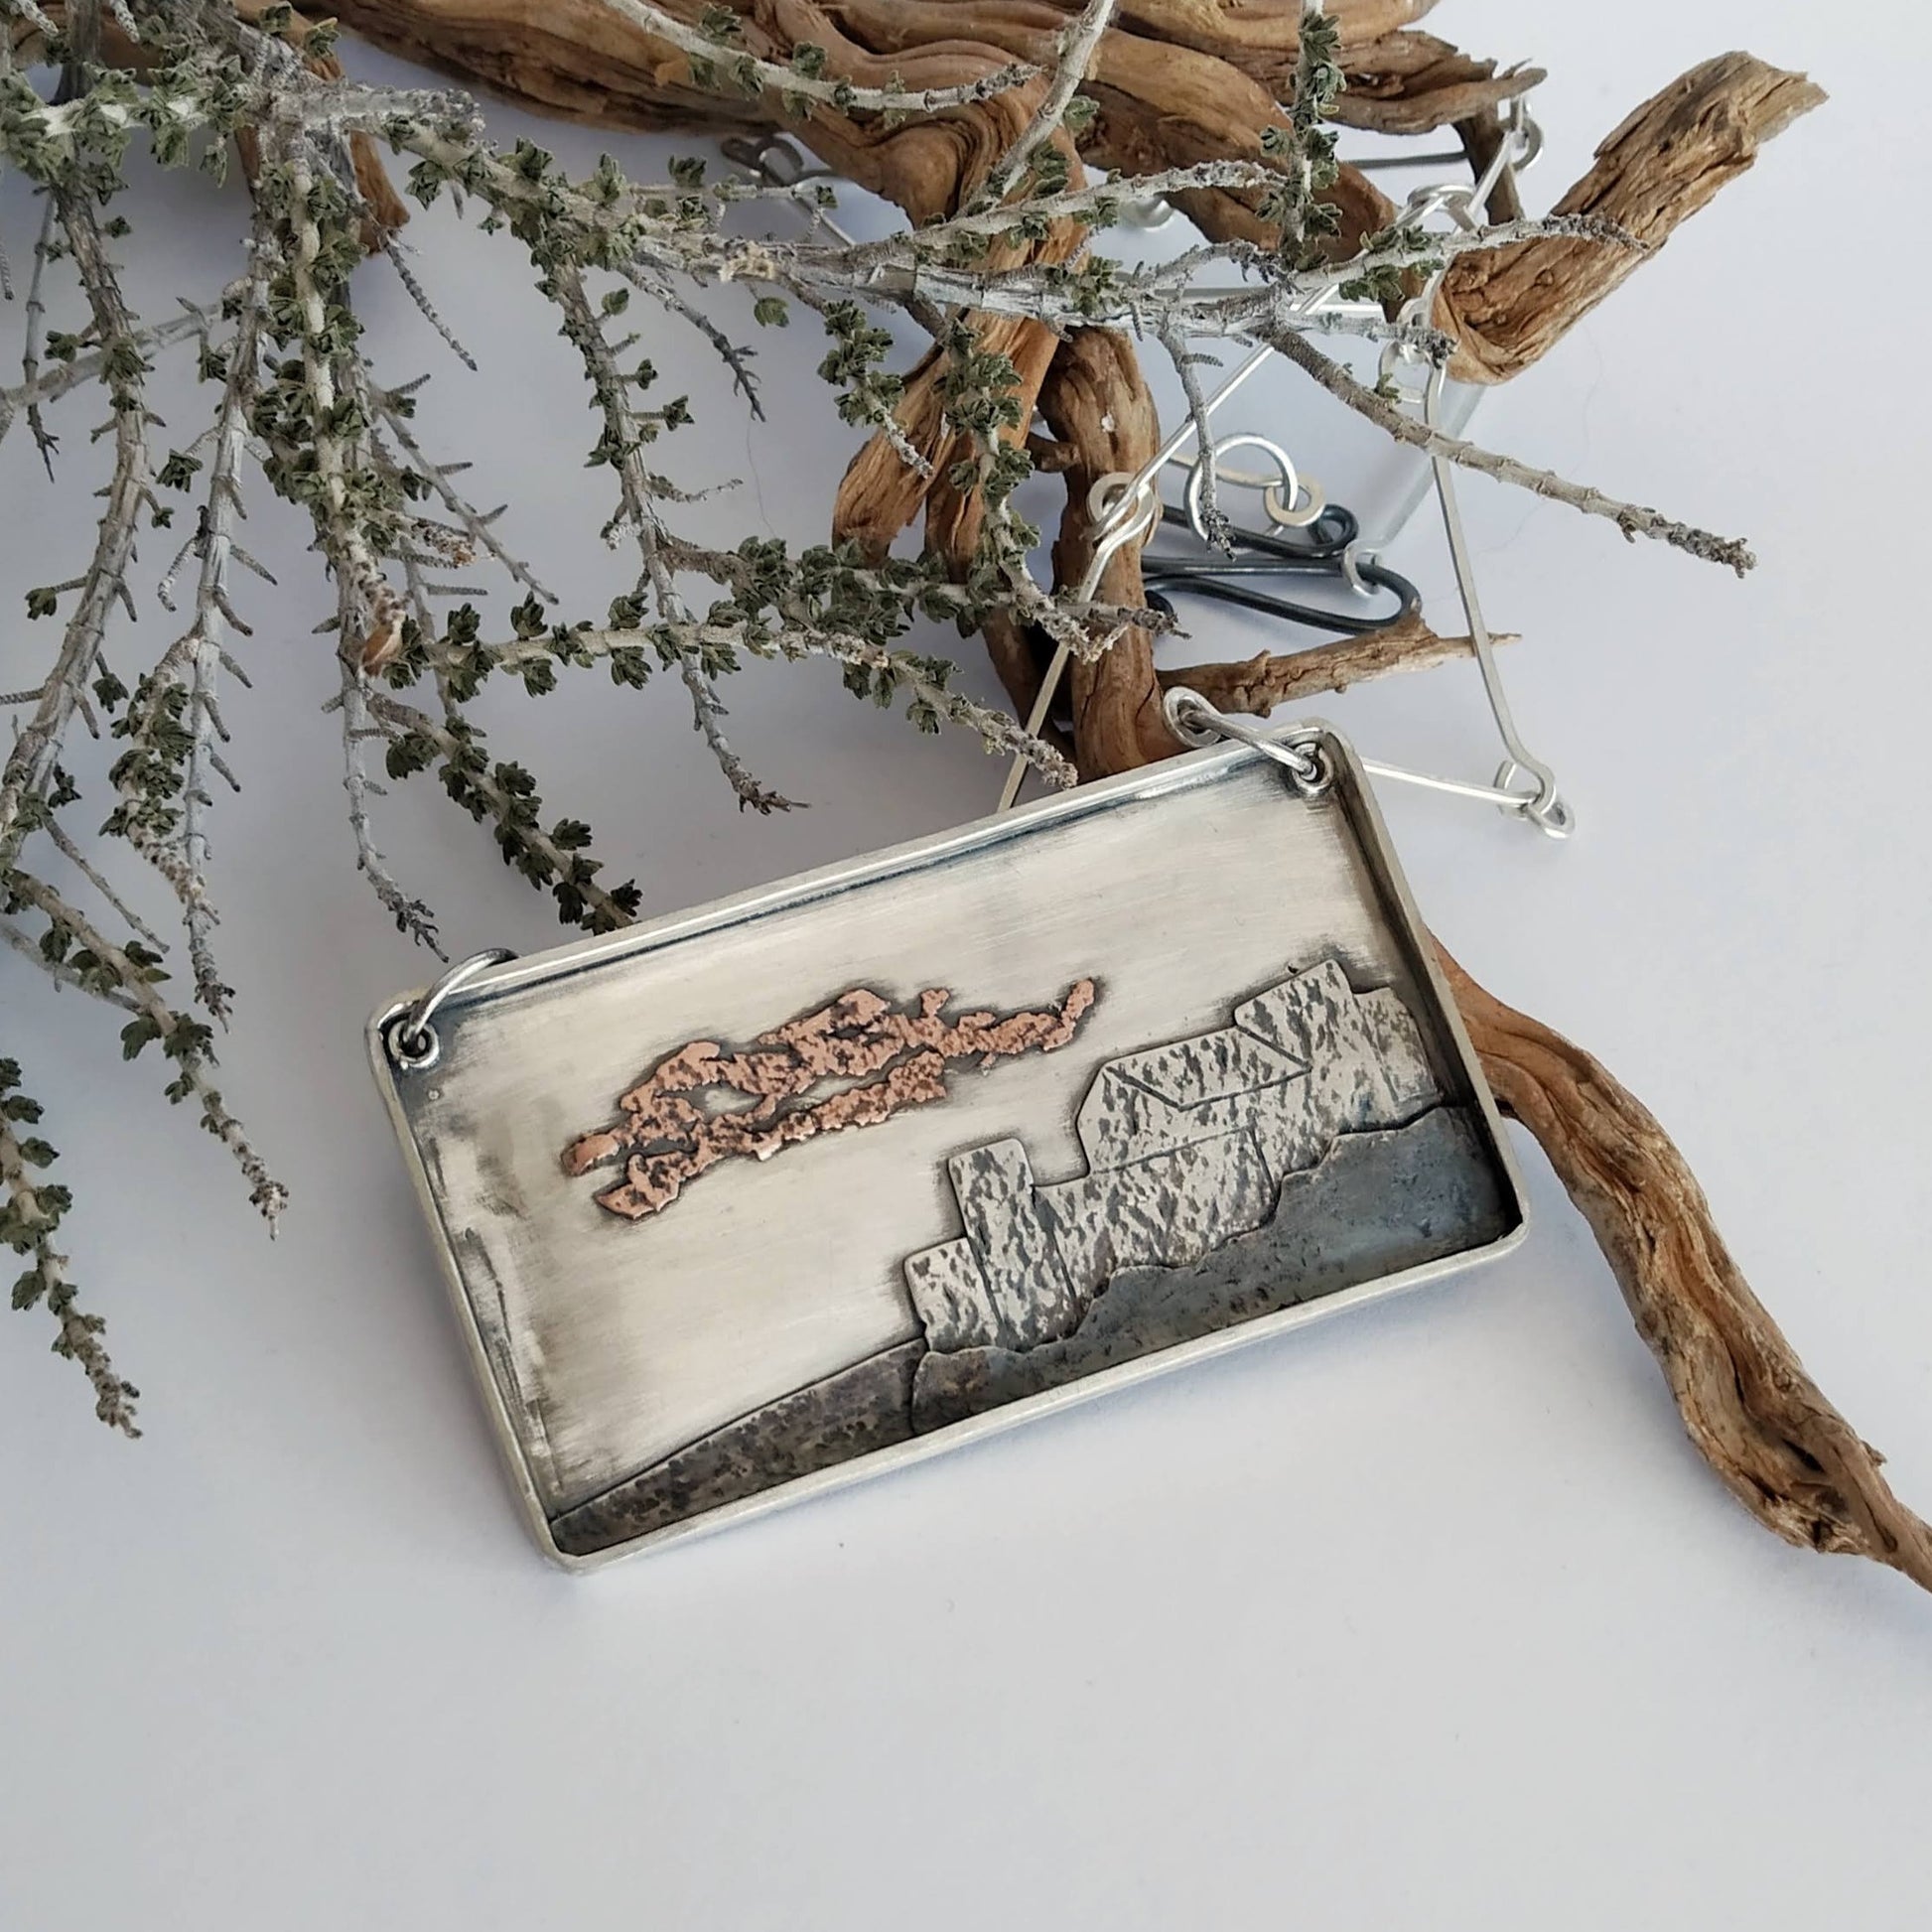 Silver pendant with oxidized silver and copper layers representing a village in Italy